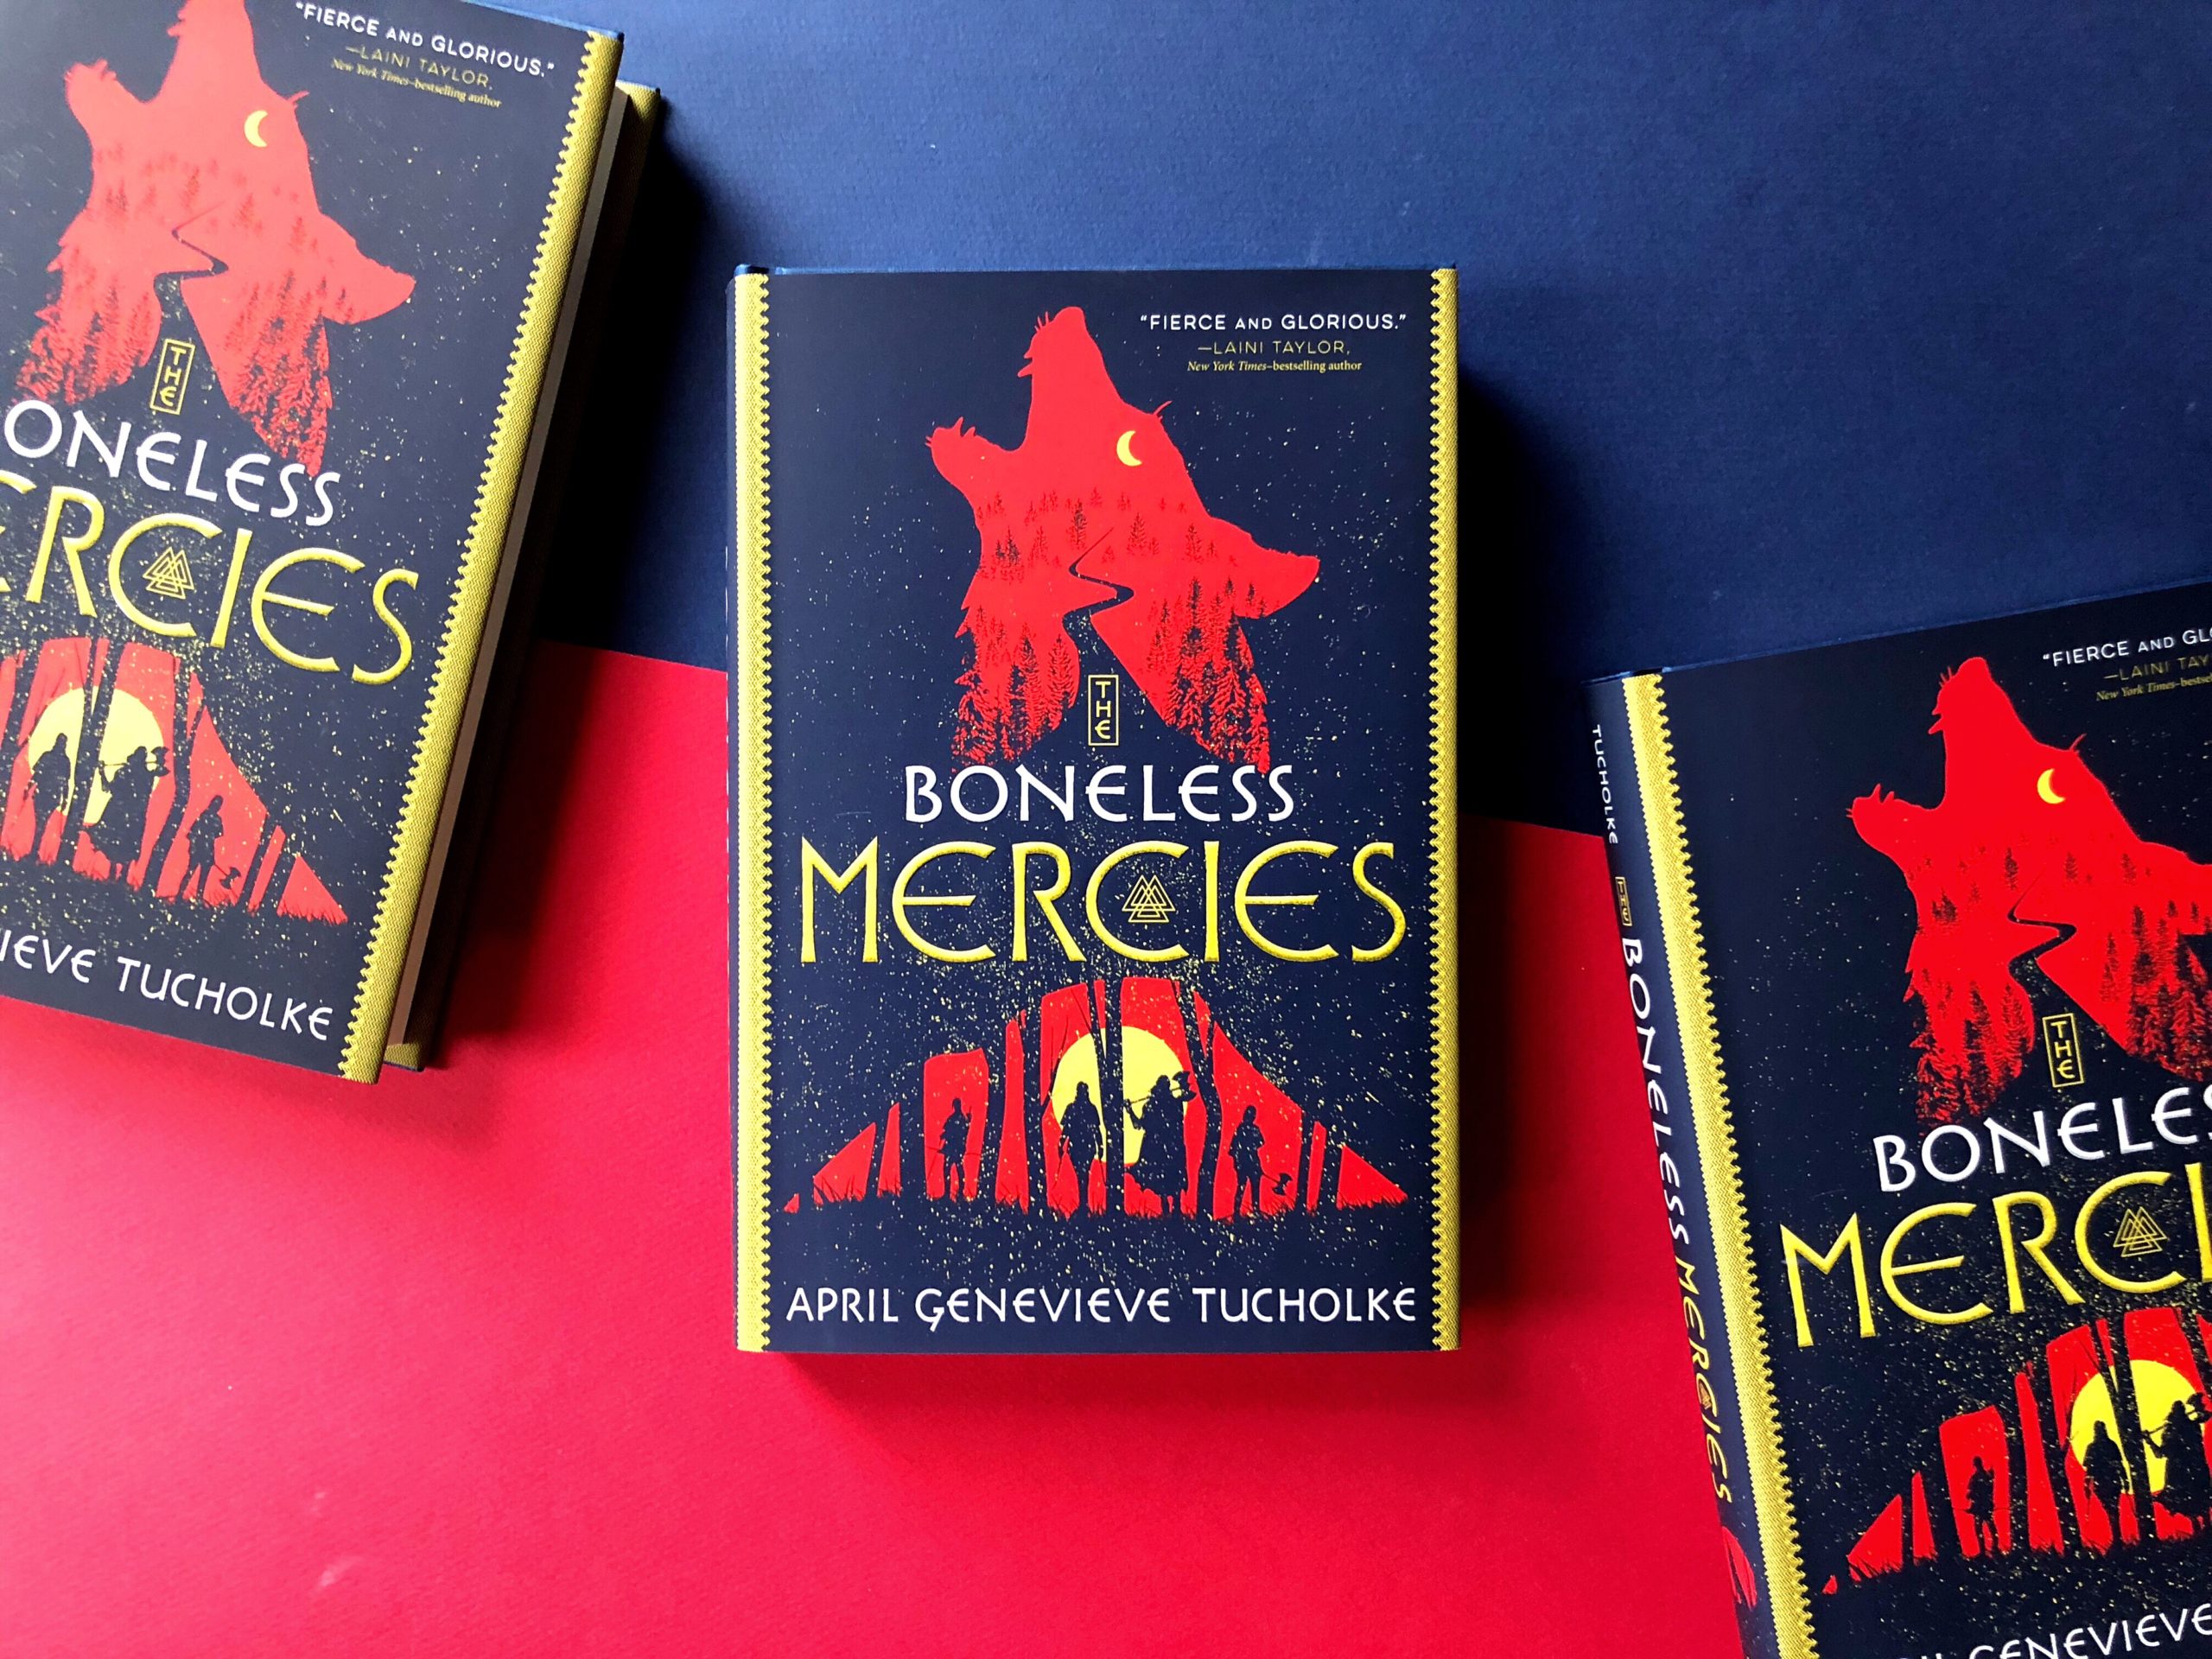 An Interview With April Genevieve Tucholke, author of The Boneless Mercies